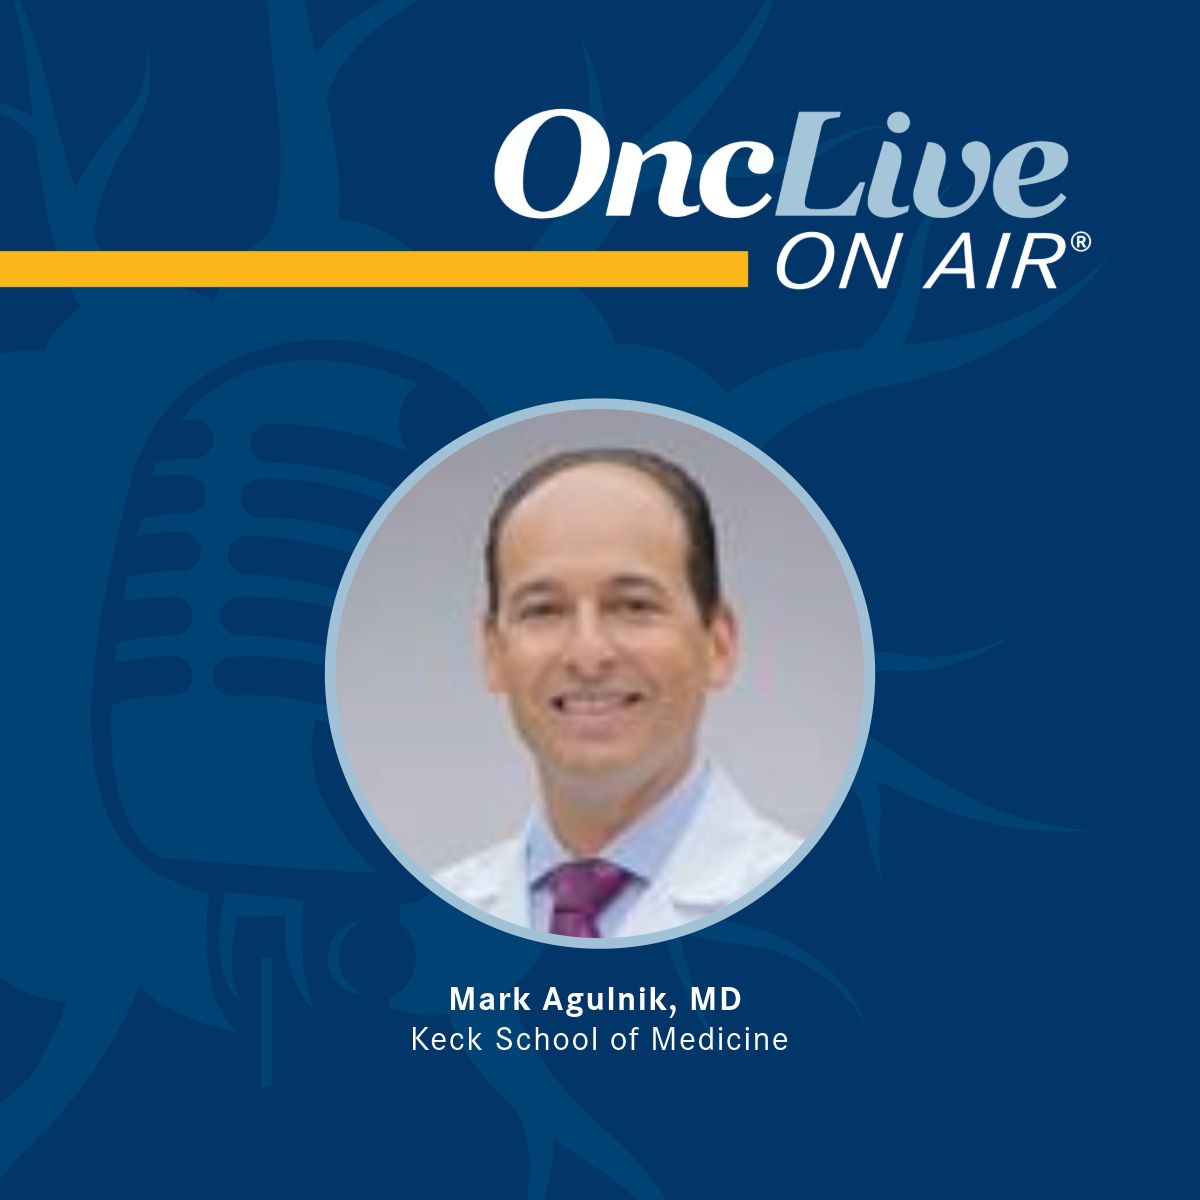 Mark Agulnik, MD, professor, clinical medicine, vice chair, faculty development, Department of Medicine, section chief, Sarcomas & Melanoma, Keck School of Medicine, the University of Southern California